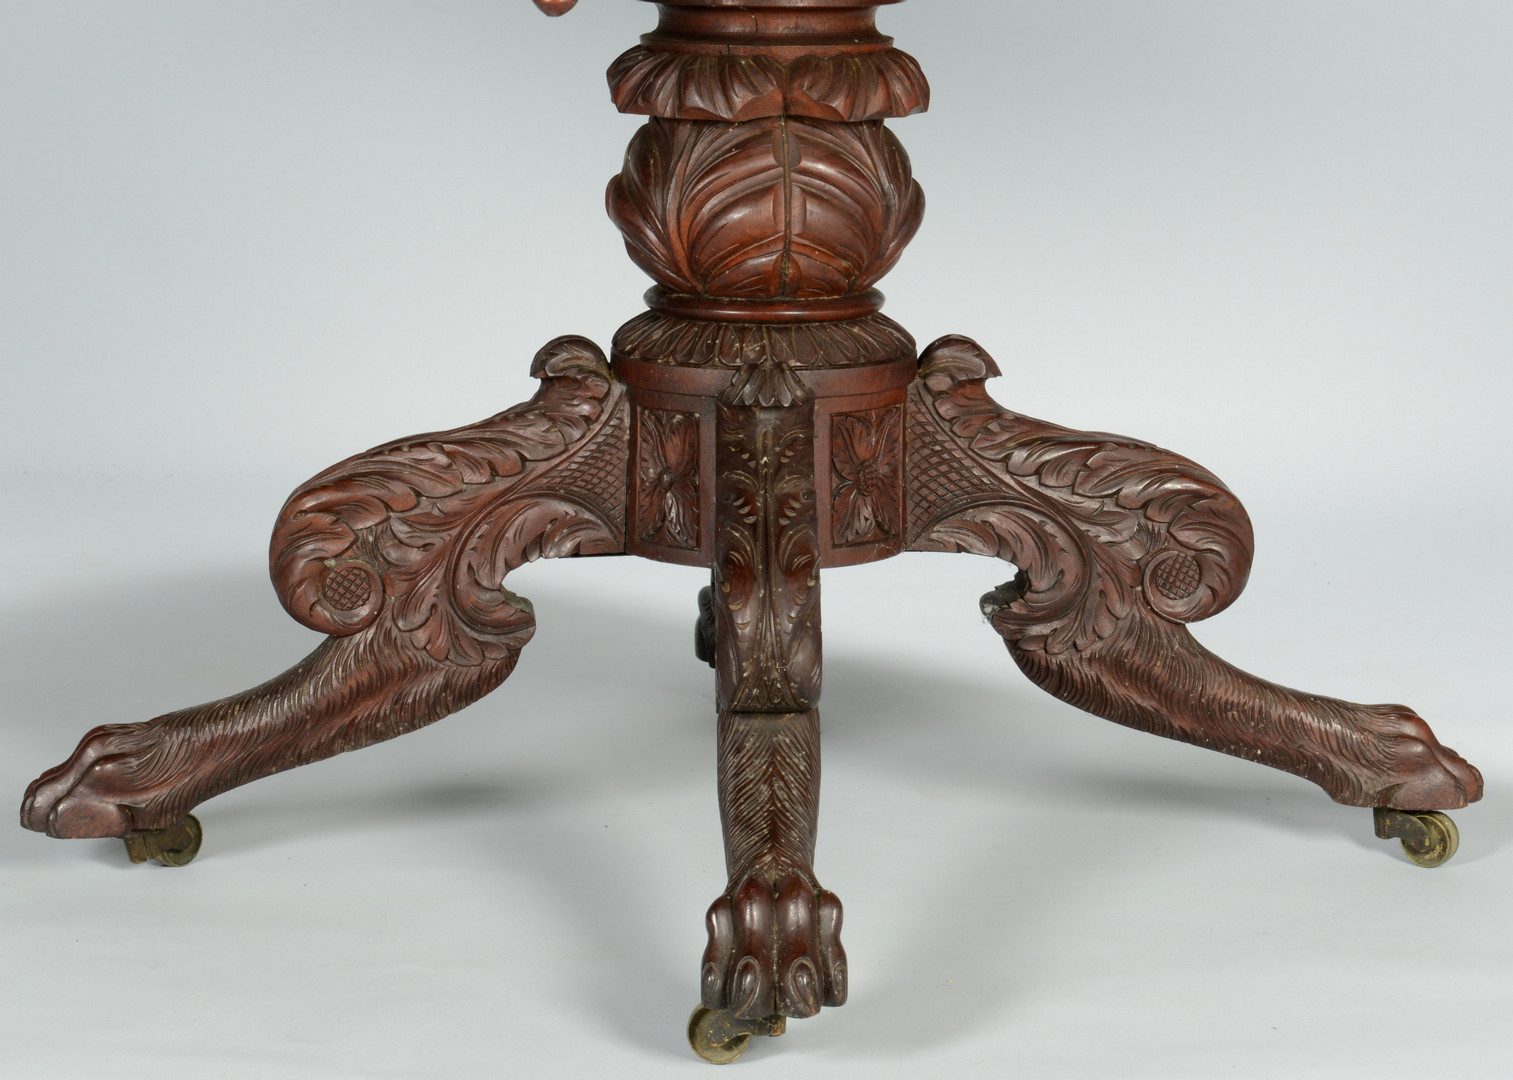 Lot 385: Classical Breakfast Table, Paw Feet